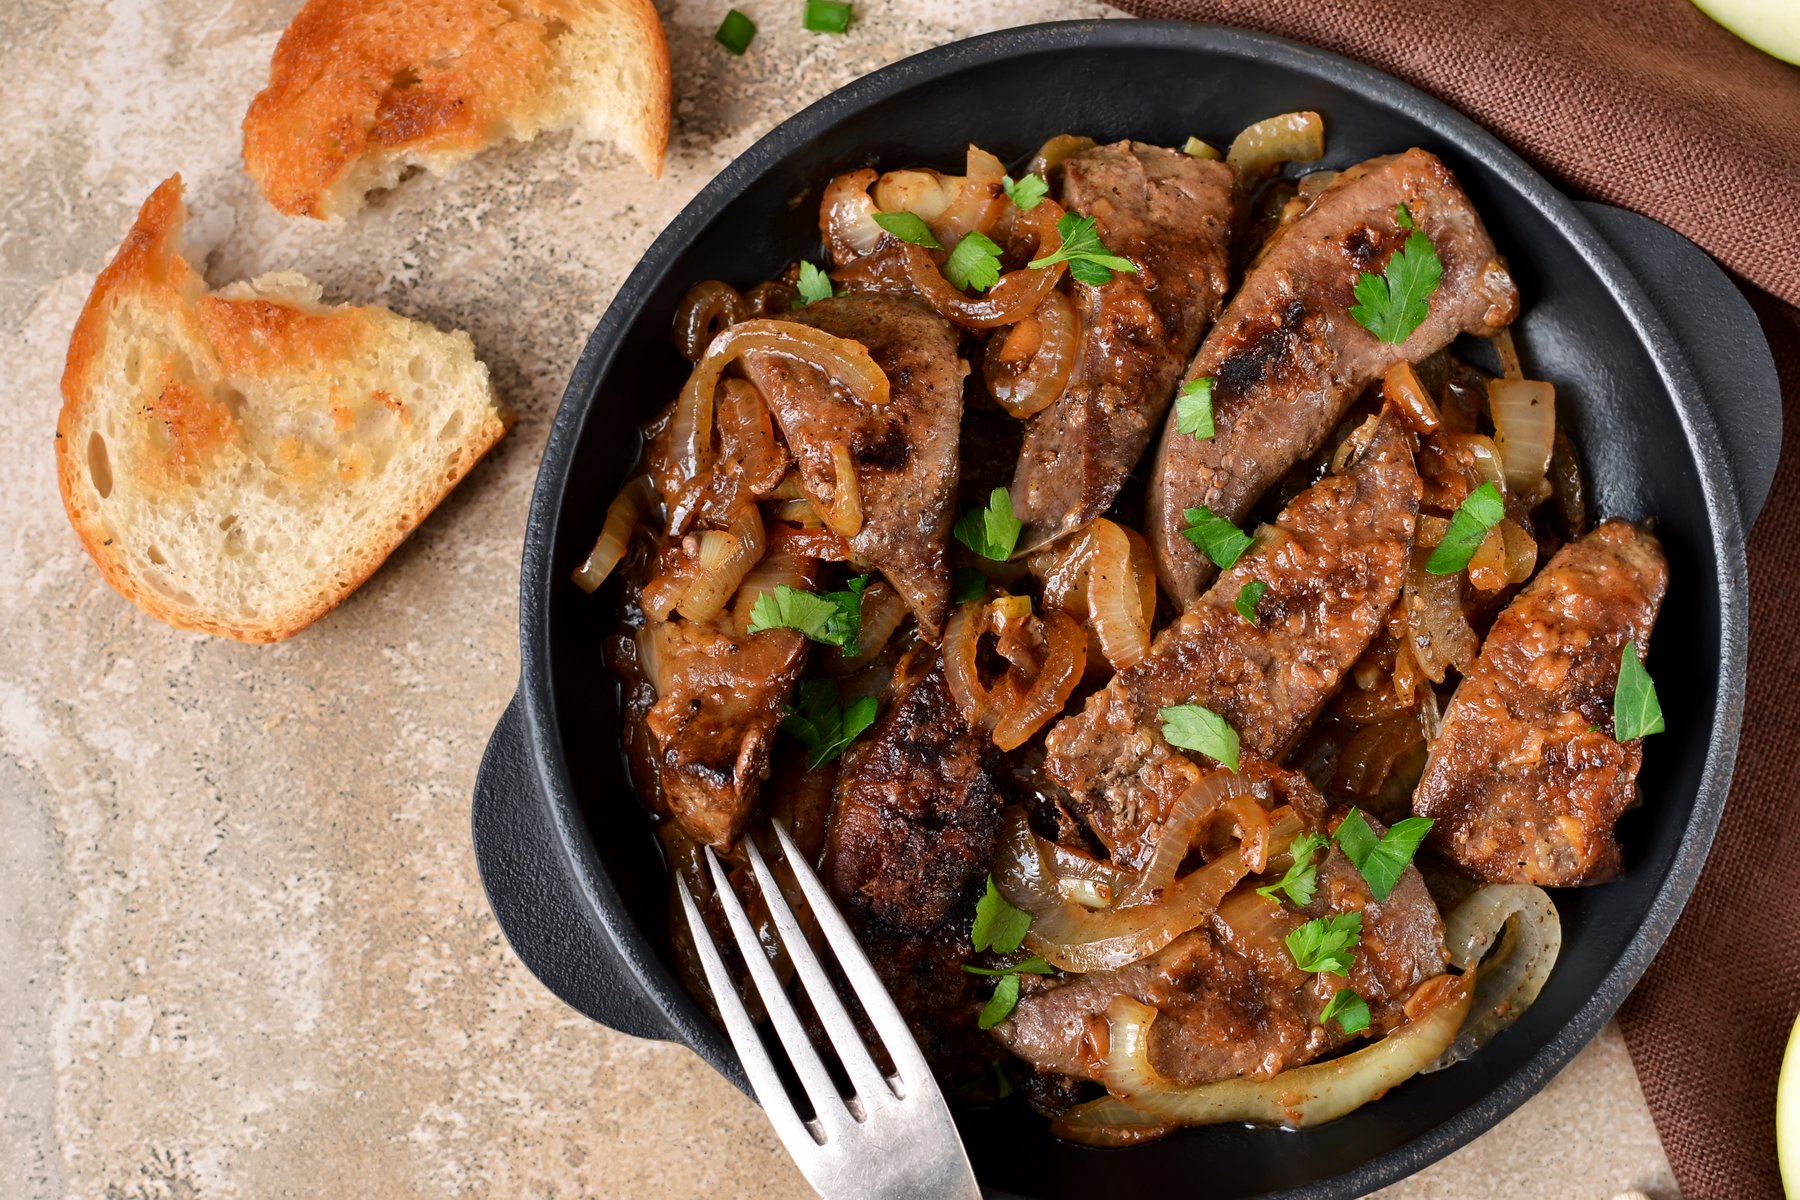 Why liver has gone from super-hated to superfood (plus a great liver &  onions recipe)